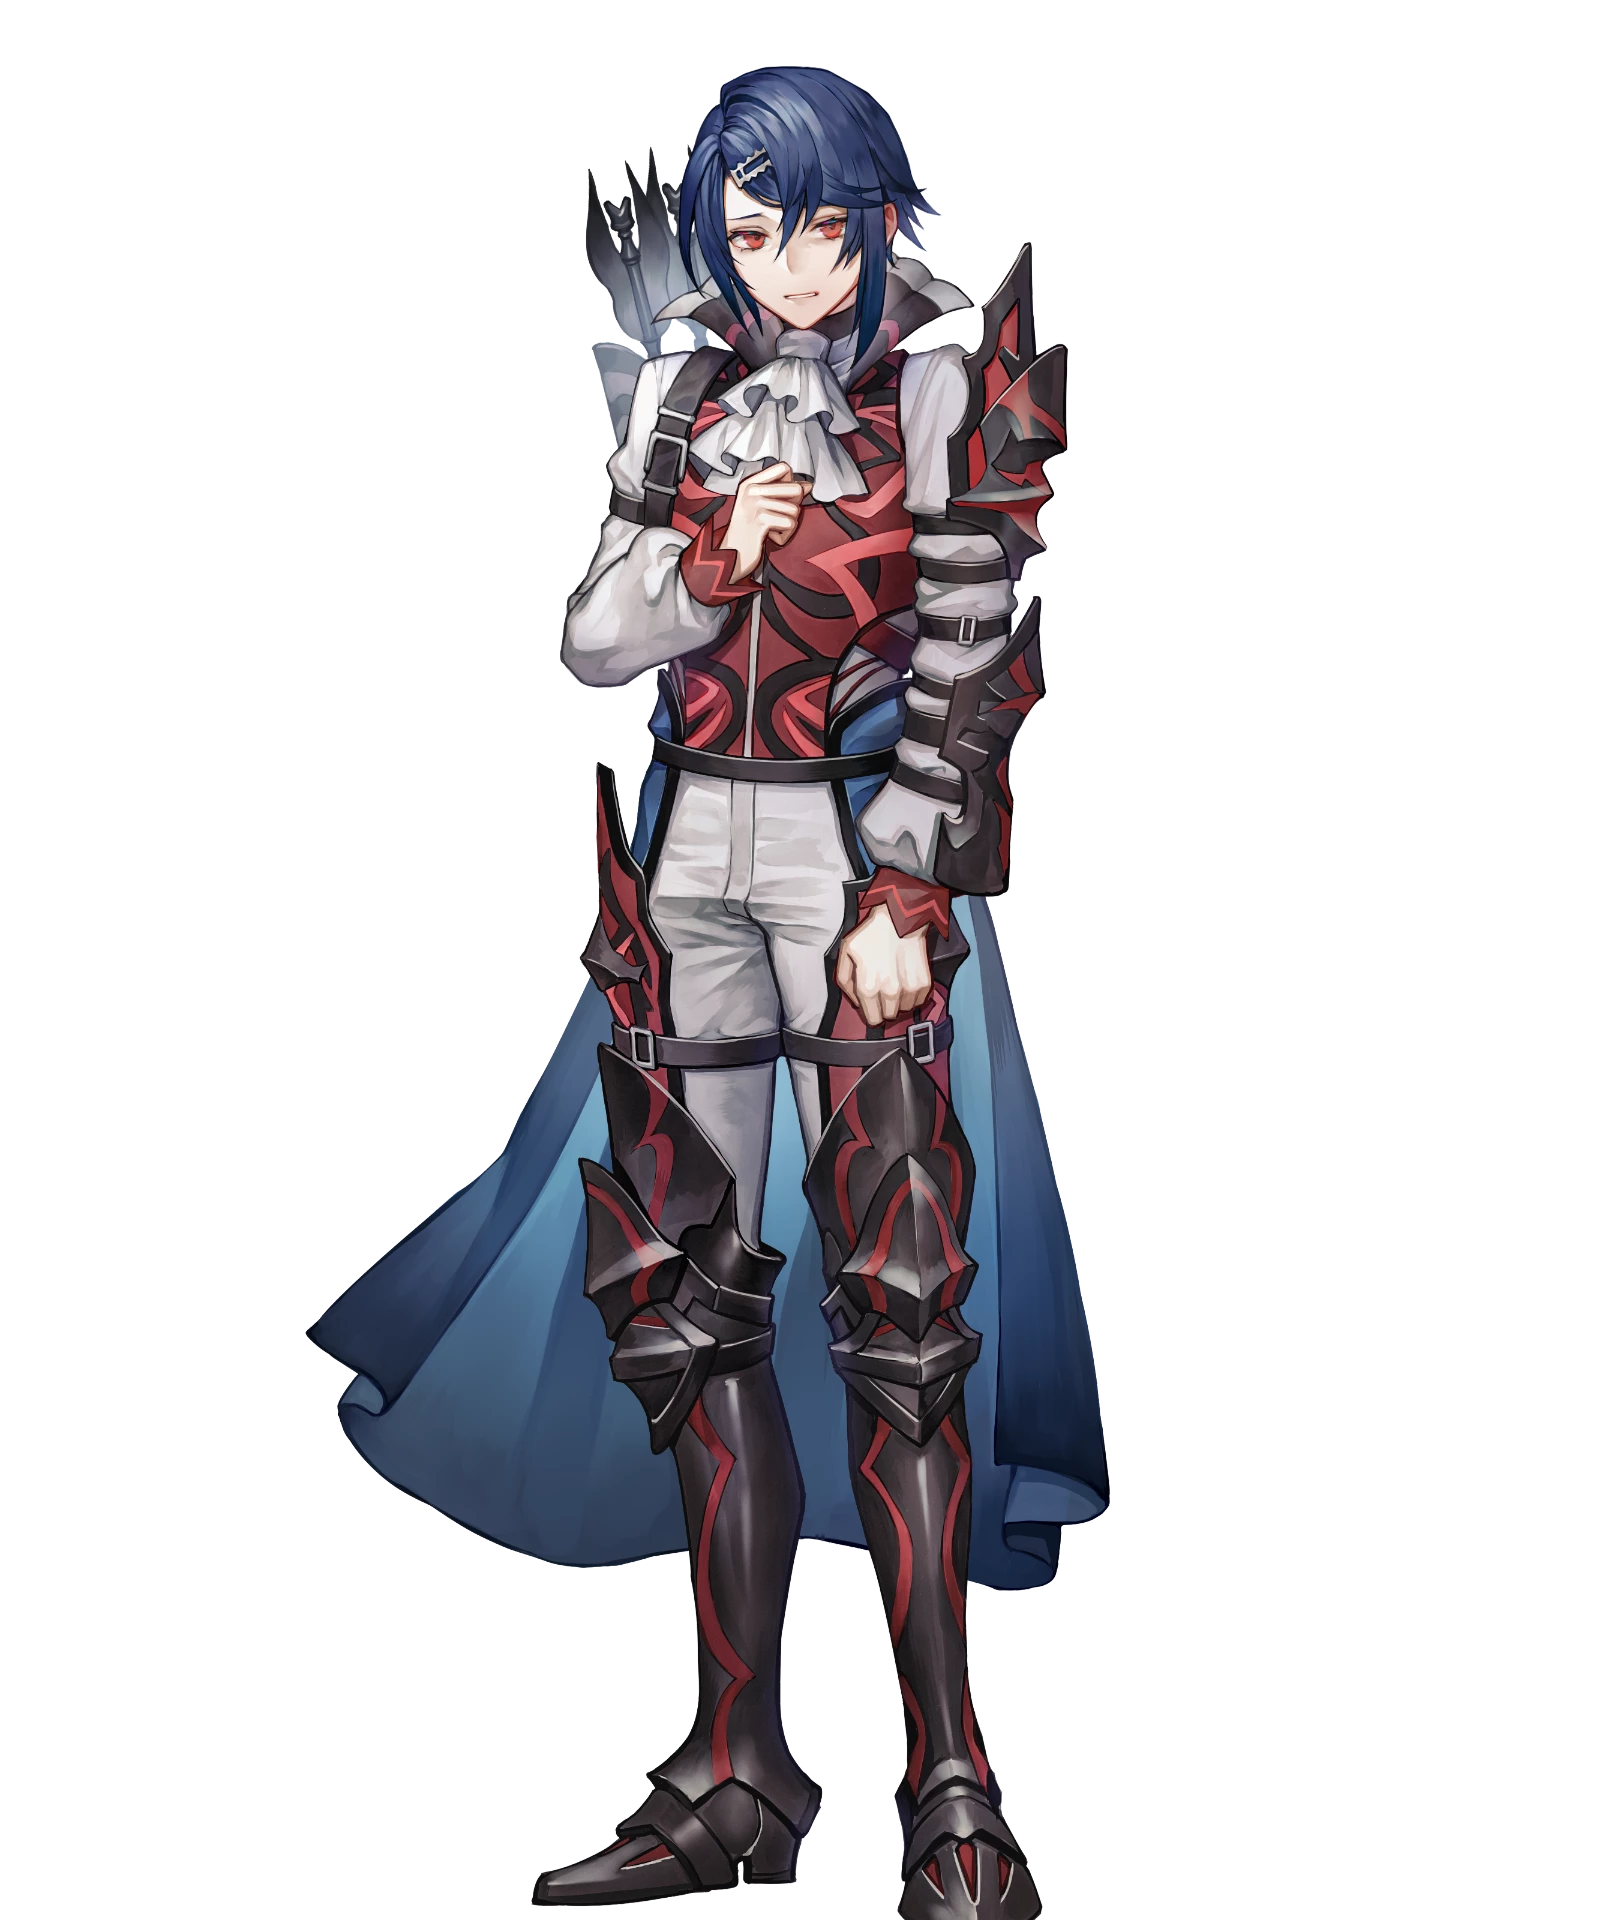 The Value of Life - Fire Emblem Wiki